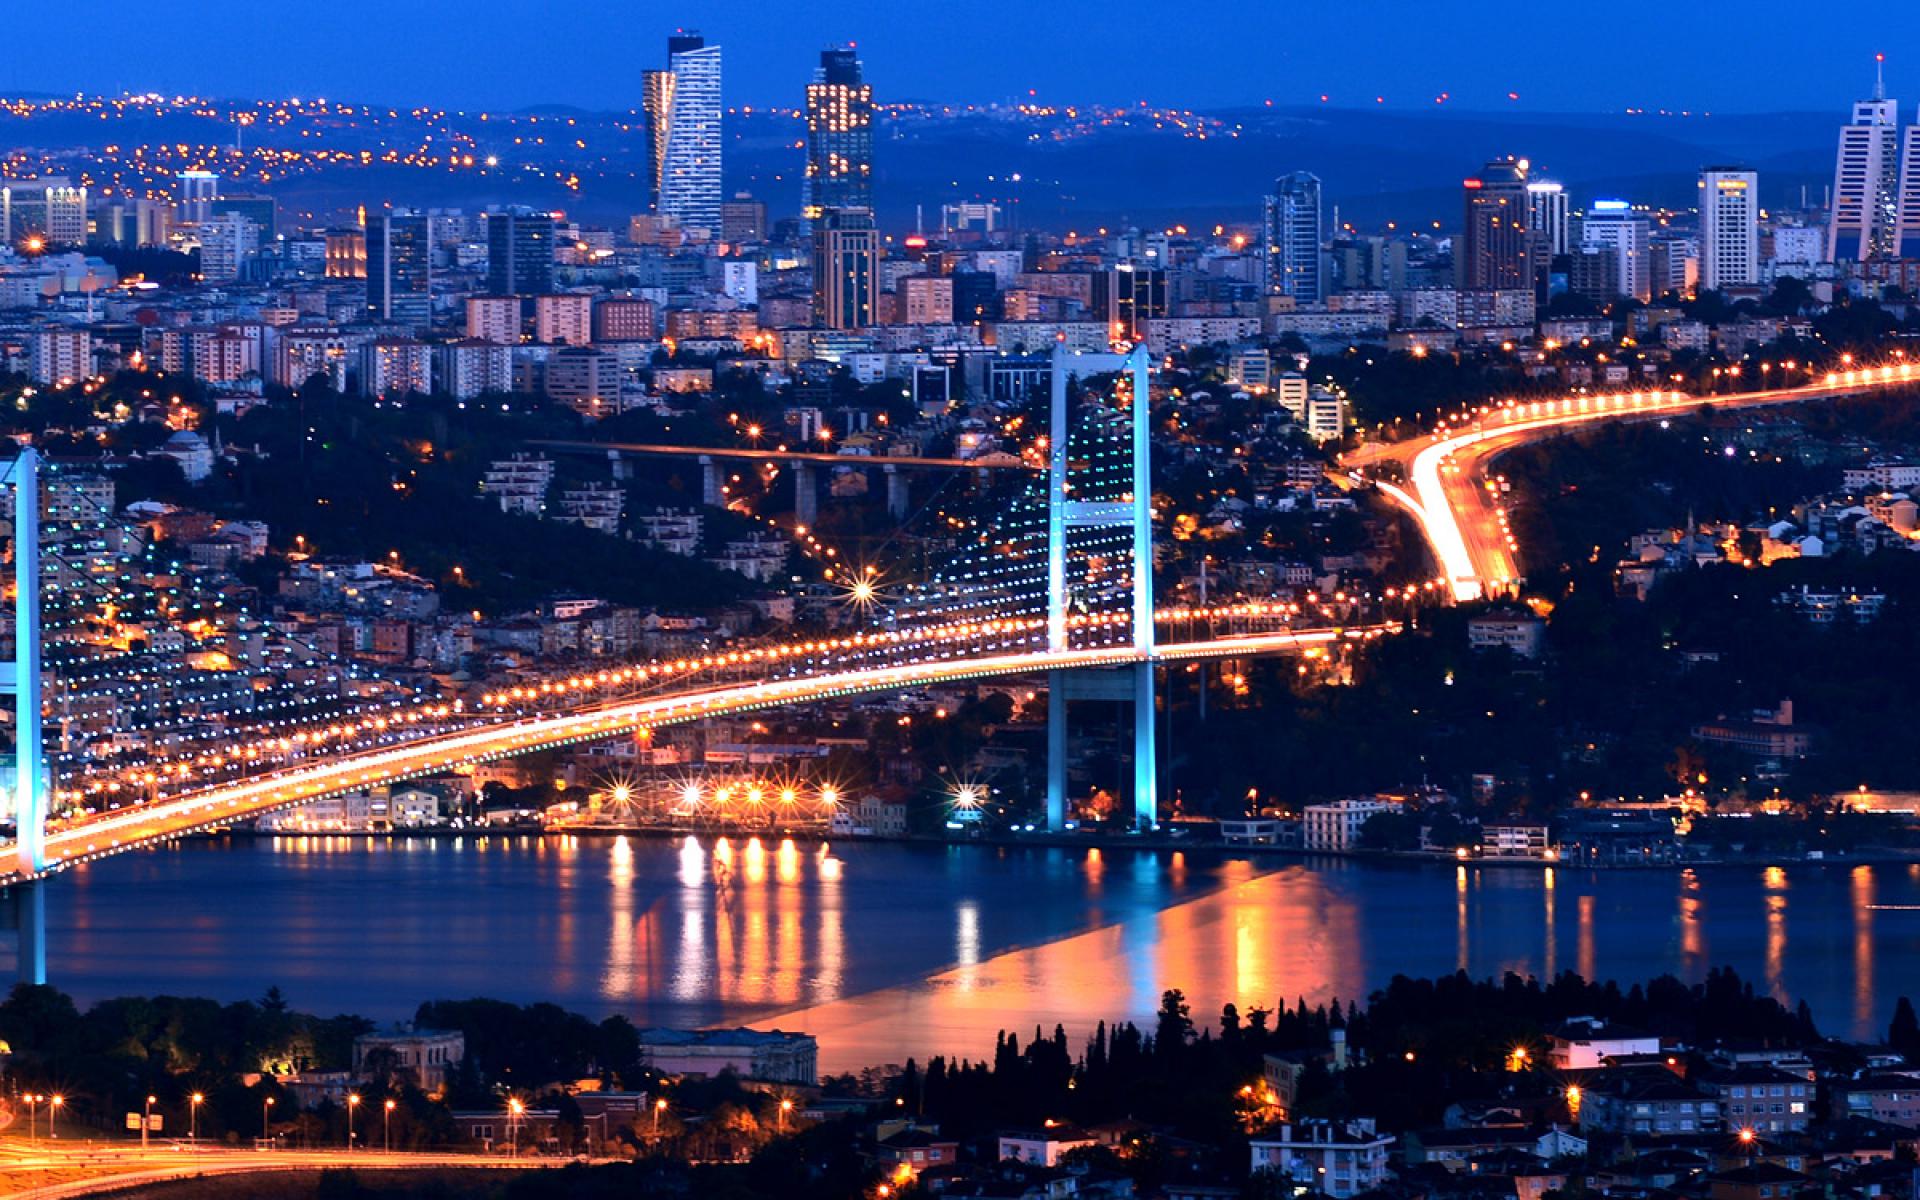 Number of Tourists to Istanbul Increases by 116%